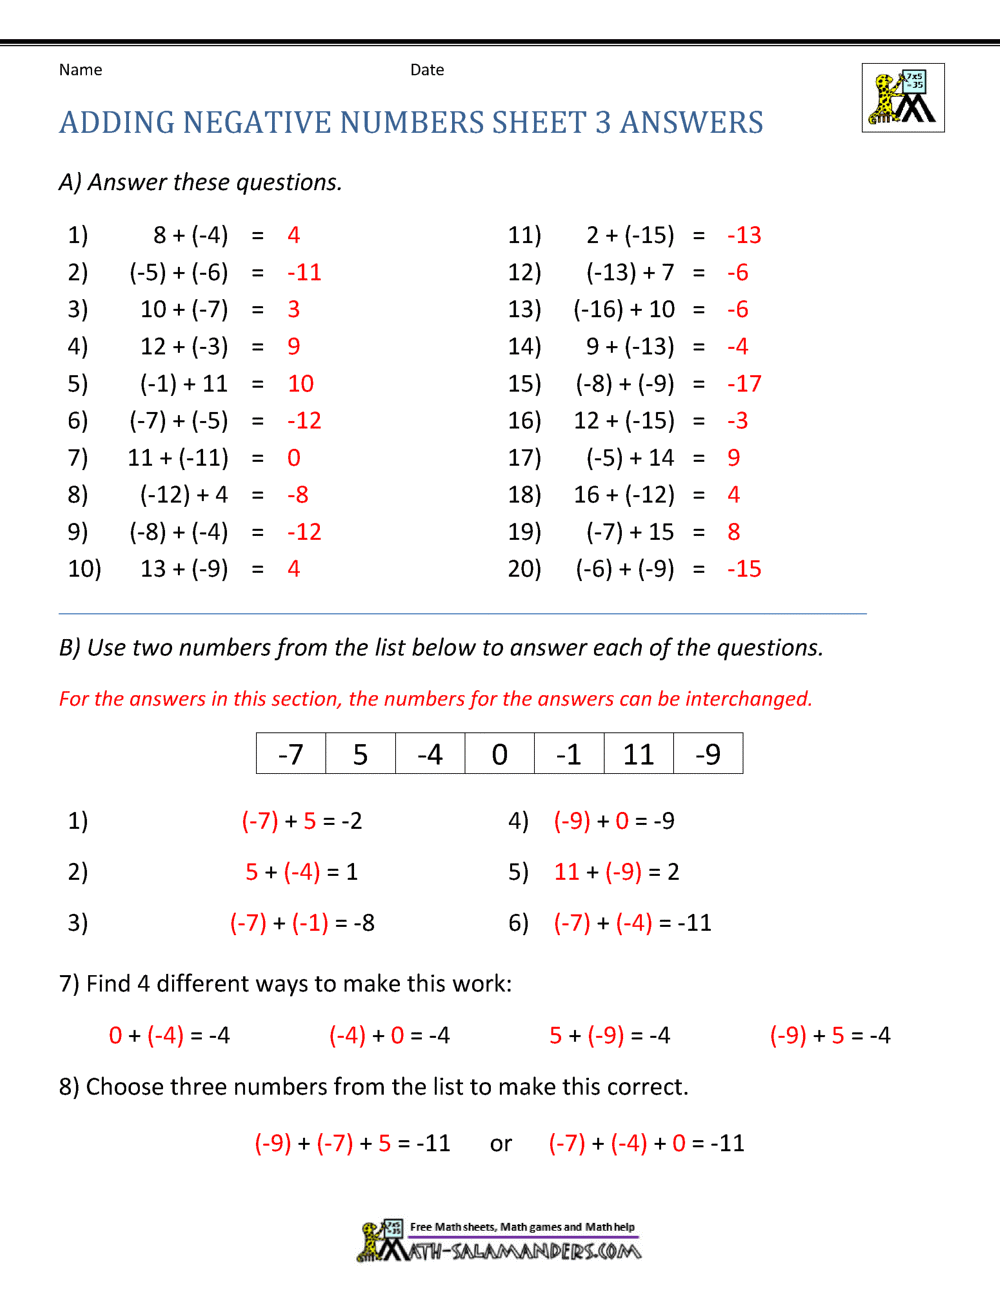 Adding Positive and Negative Numbers For Adding Integers Worksheet Pdf